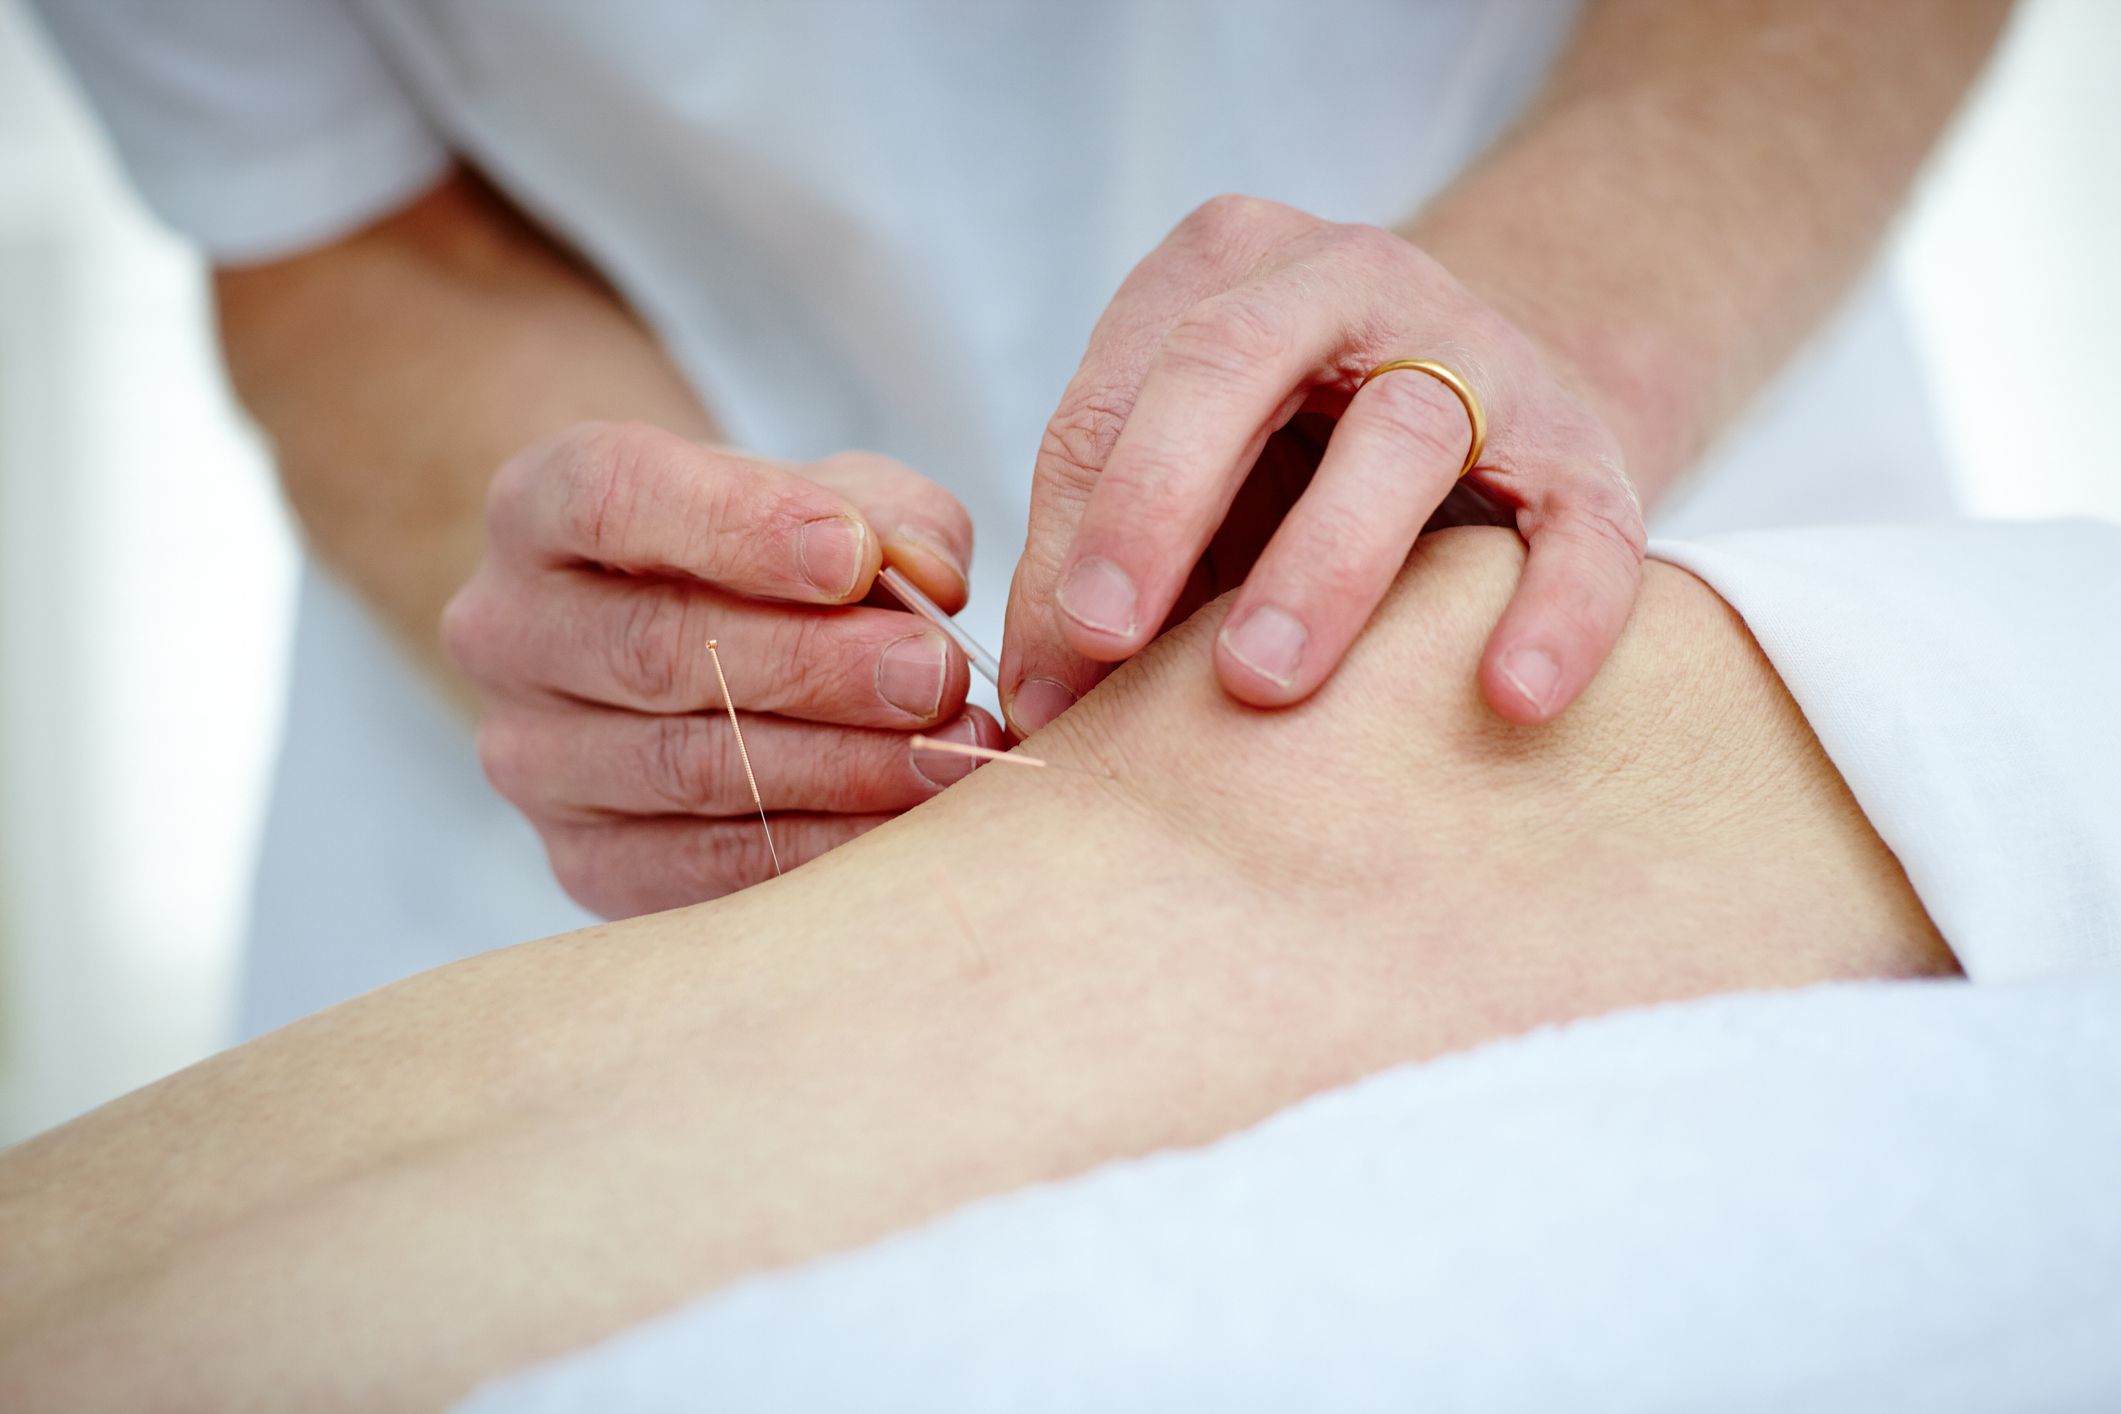 Acupuncture for Arthritis: Benefits and Risks